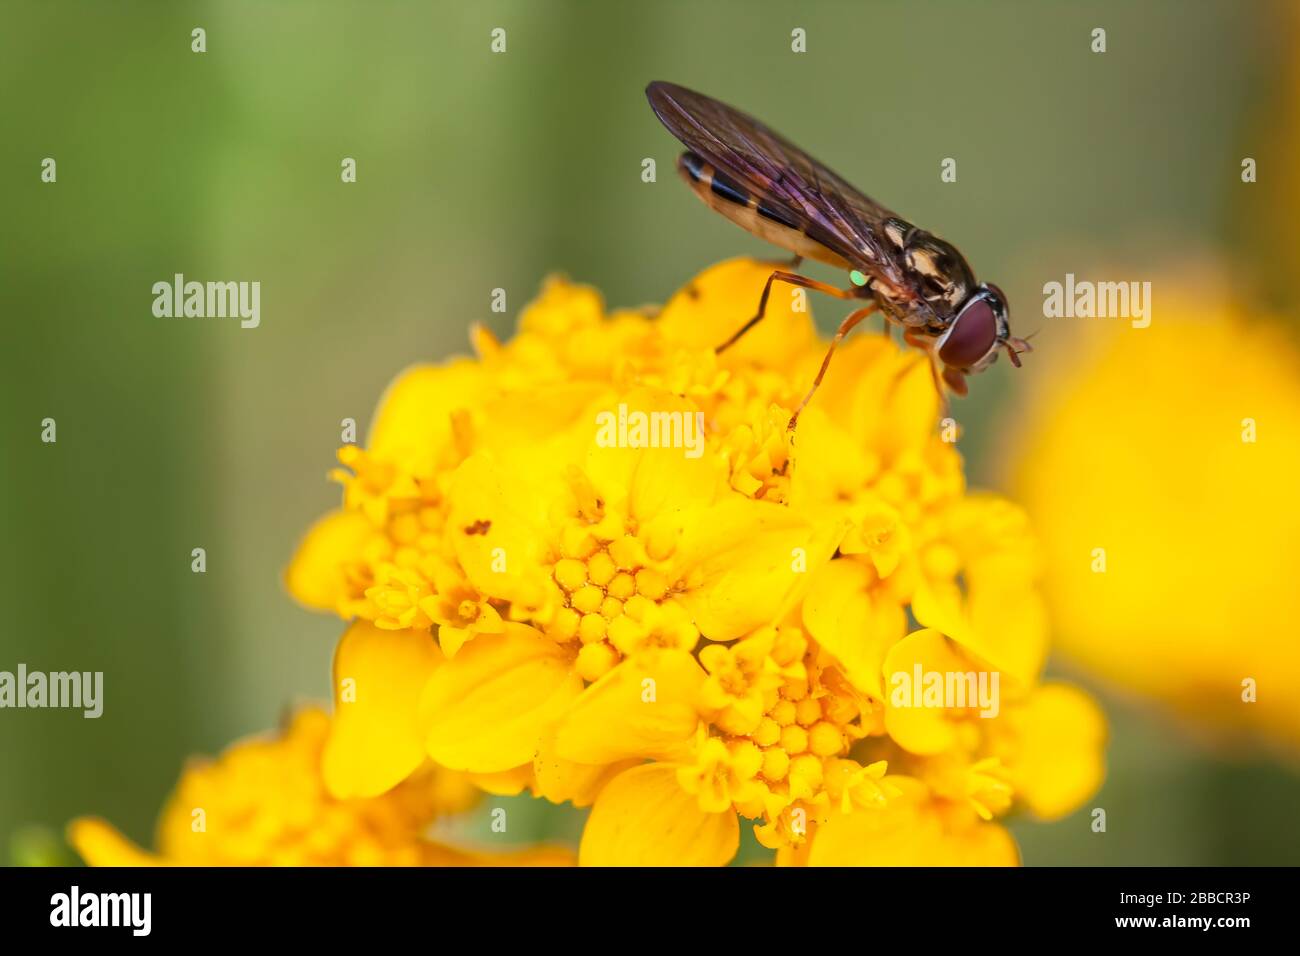 Close up at a hover fly, family Syrphidae, on cluster of seaside wooly sunflowers, Eriophyllum staechadifolium, California, USA. Stock Photo